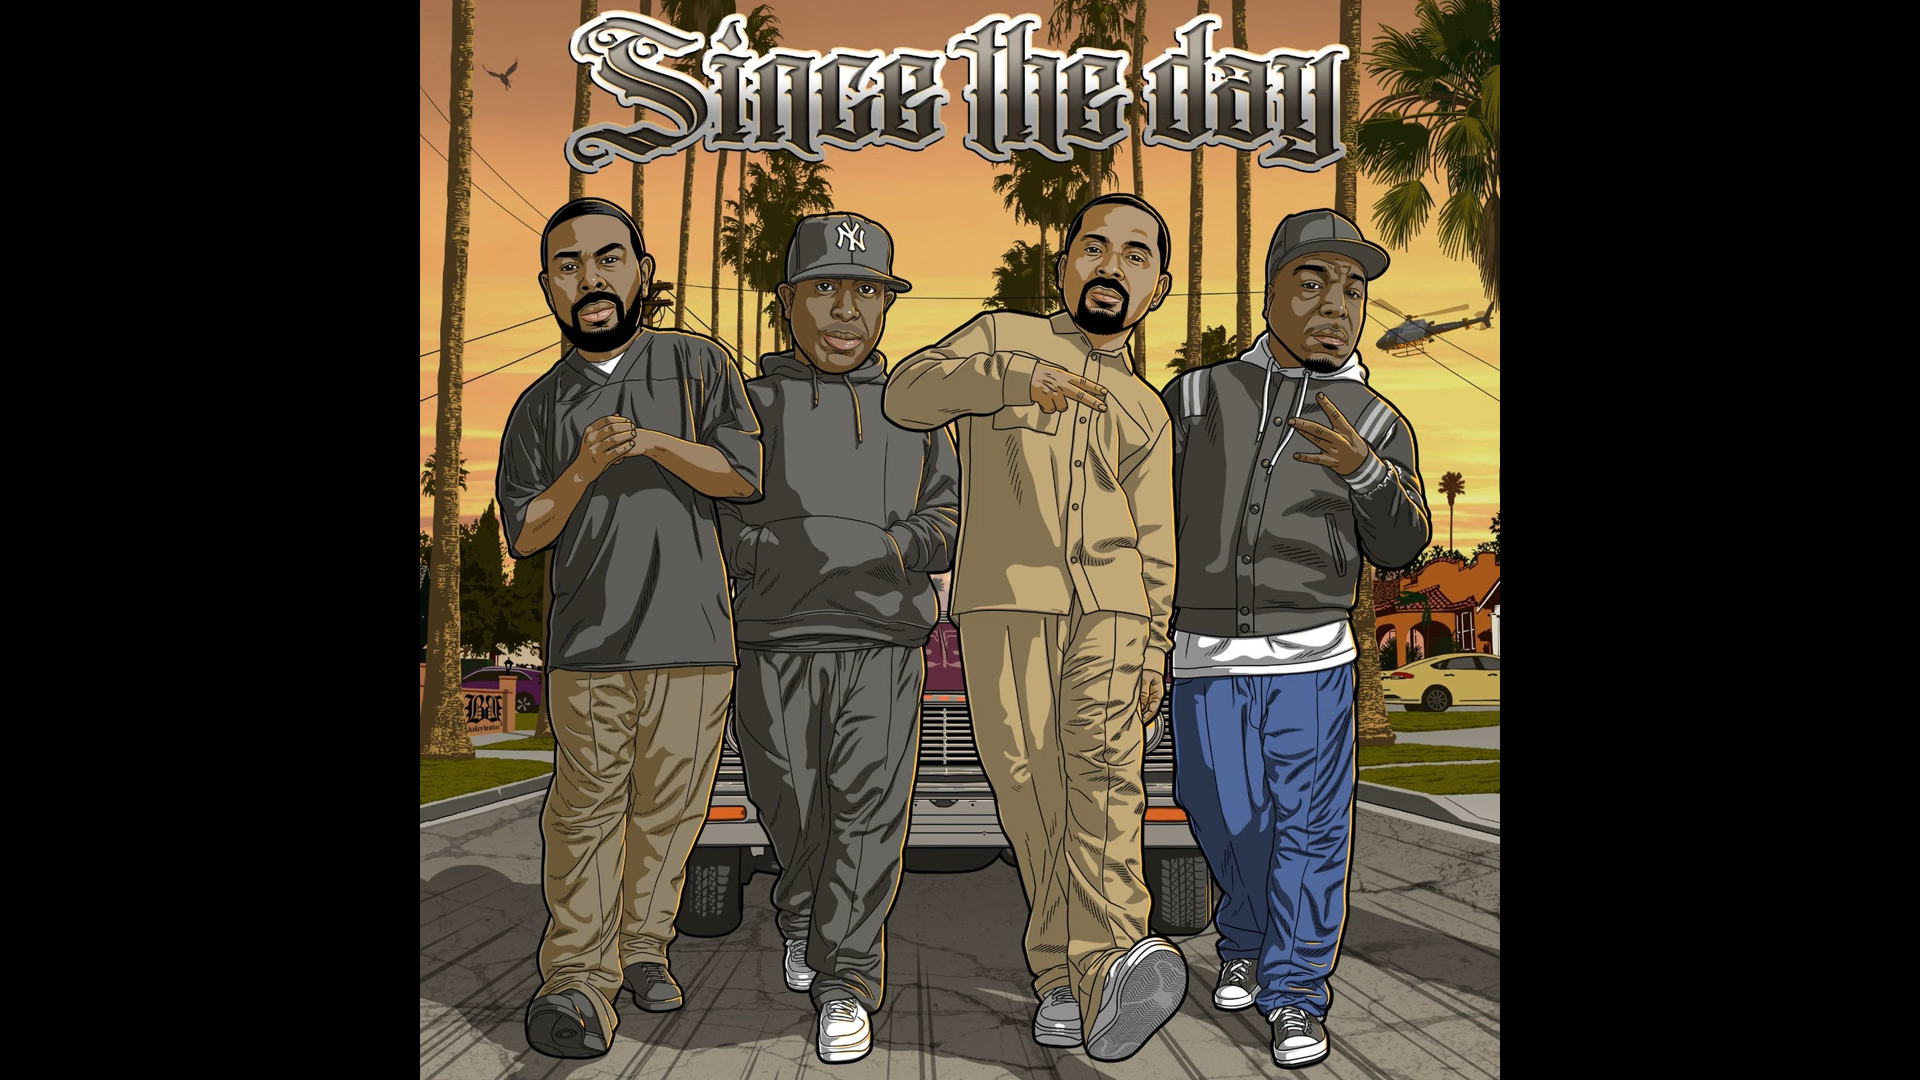 Spice 1 x DJ Premier x CL Smooth x Mike Epps – Since The Day